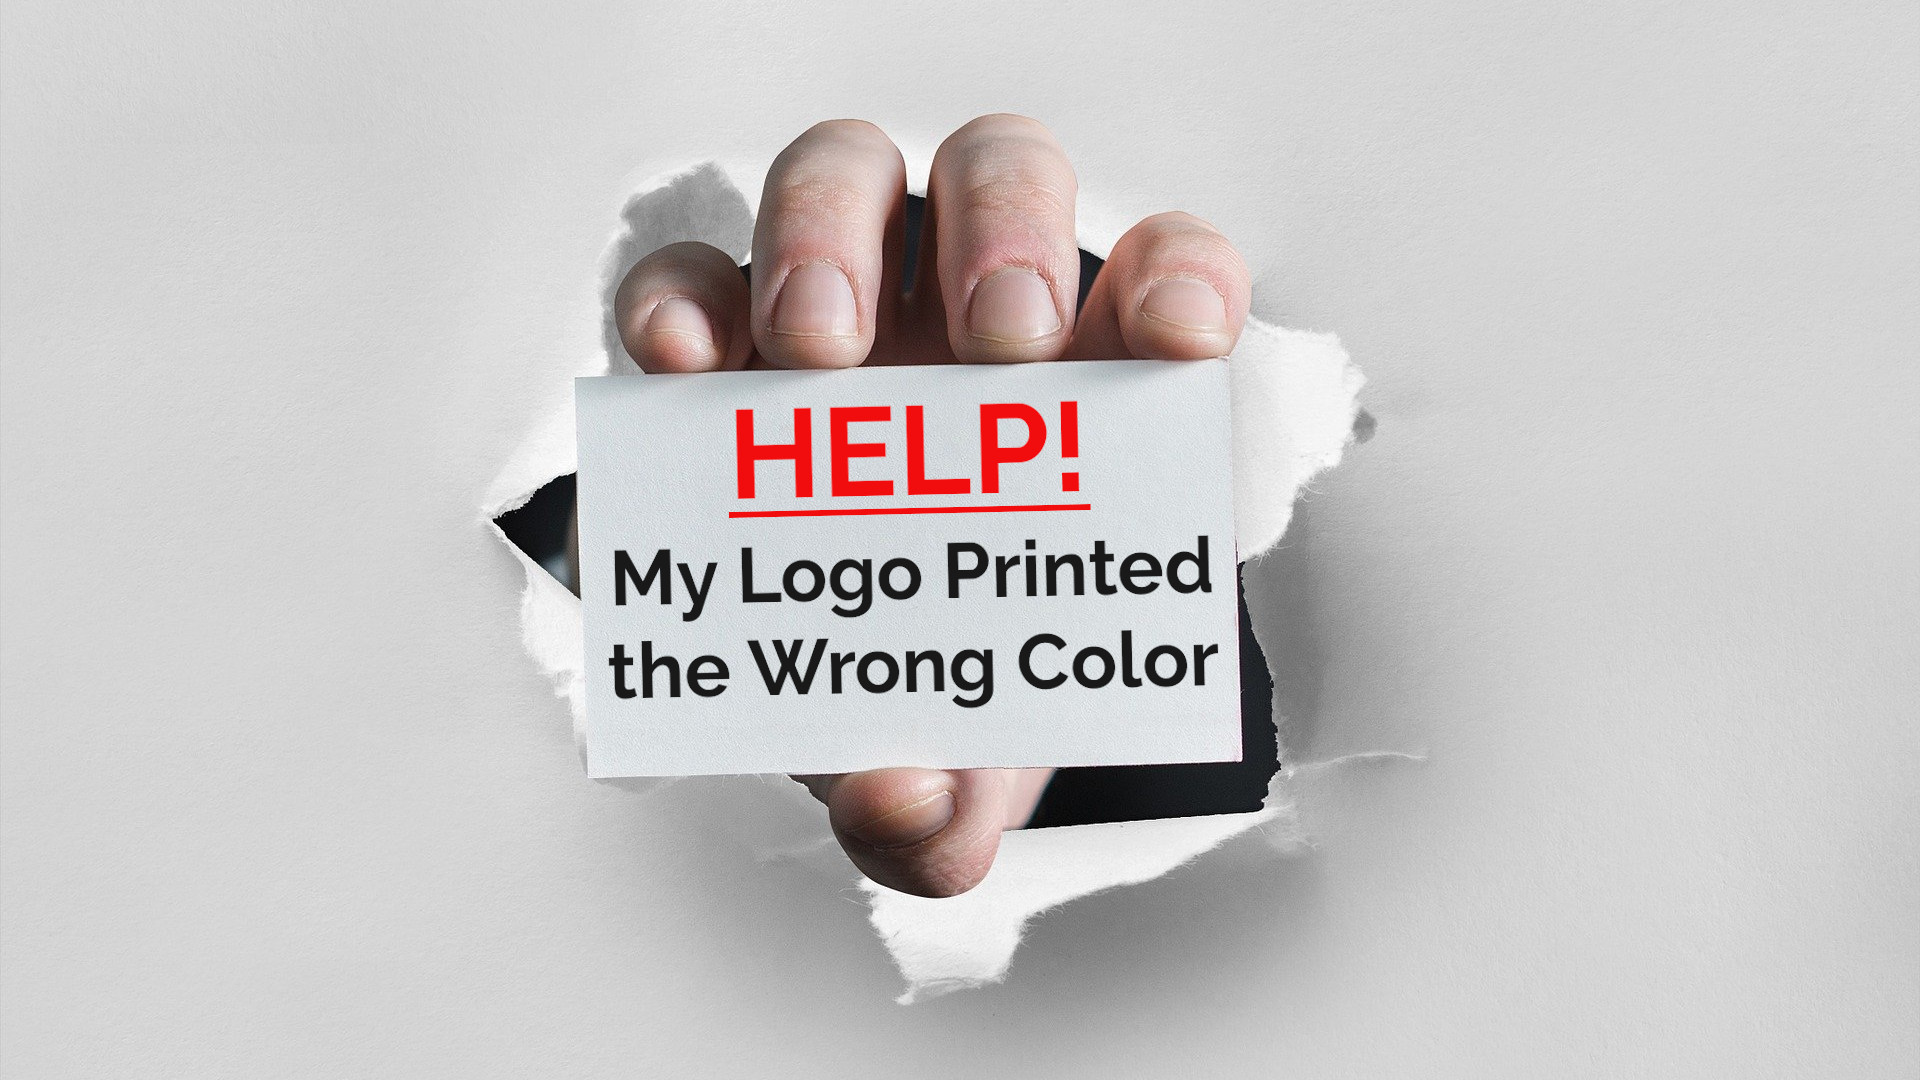 Help! My Logo Printed the Wrong Color